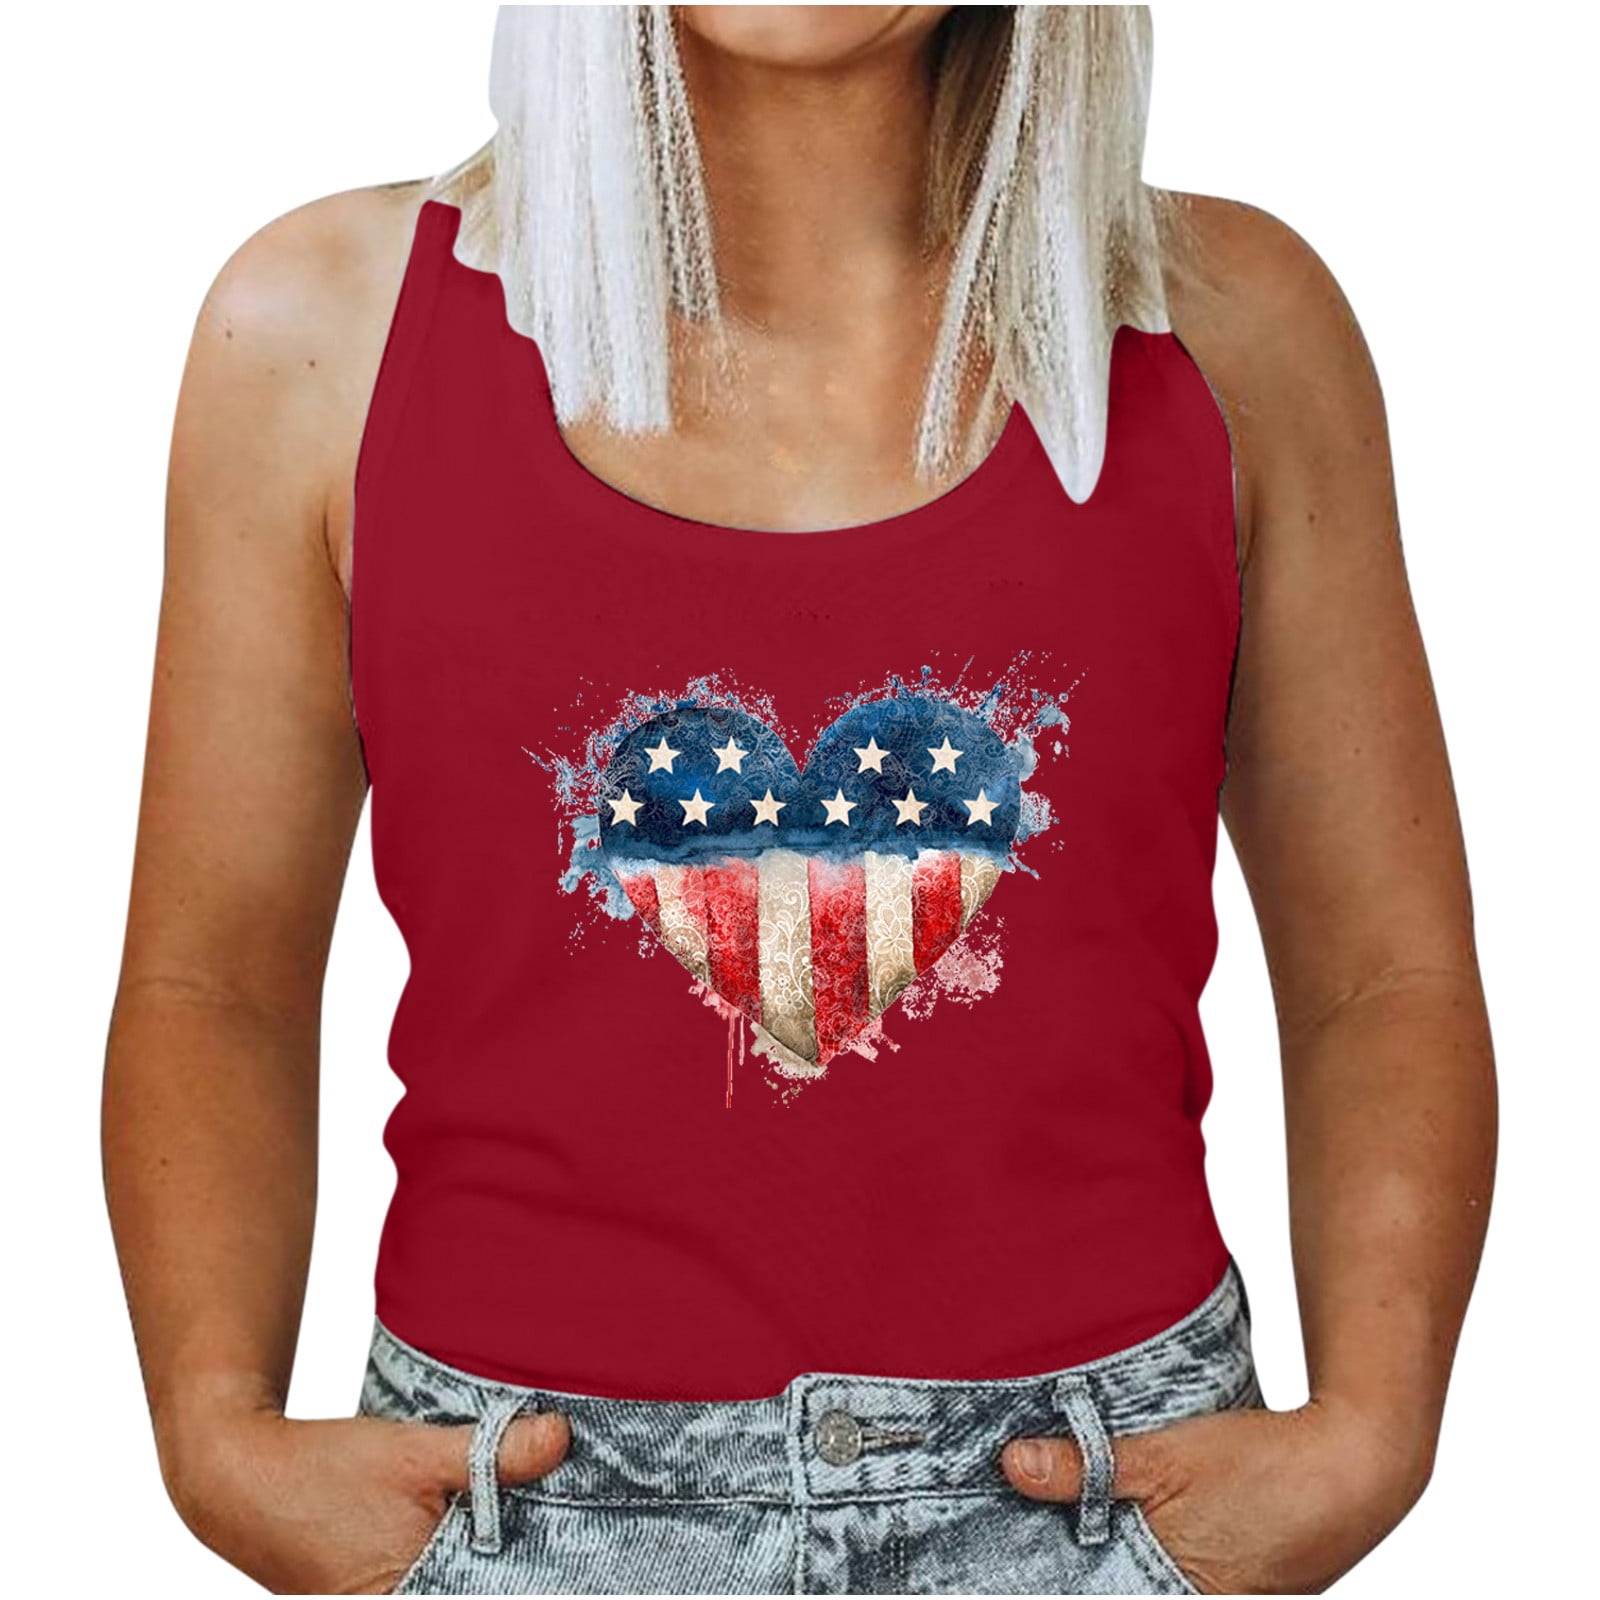 Tank Tops for Women Independence Day Crew Neck Sleeveless Graphic Tees Summer Ladies Slim Casual Tunic Blouse Vest 